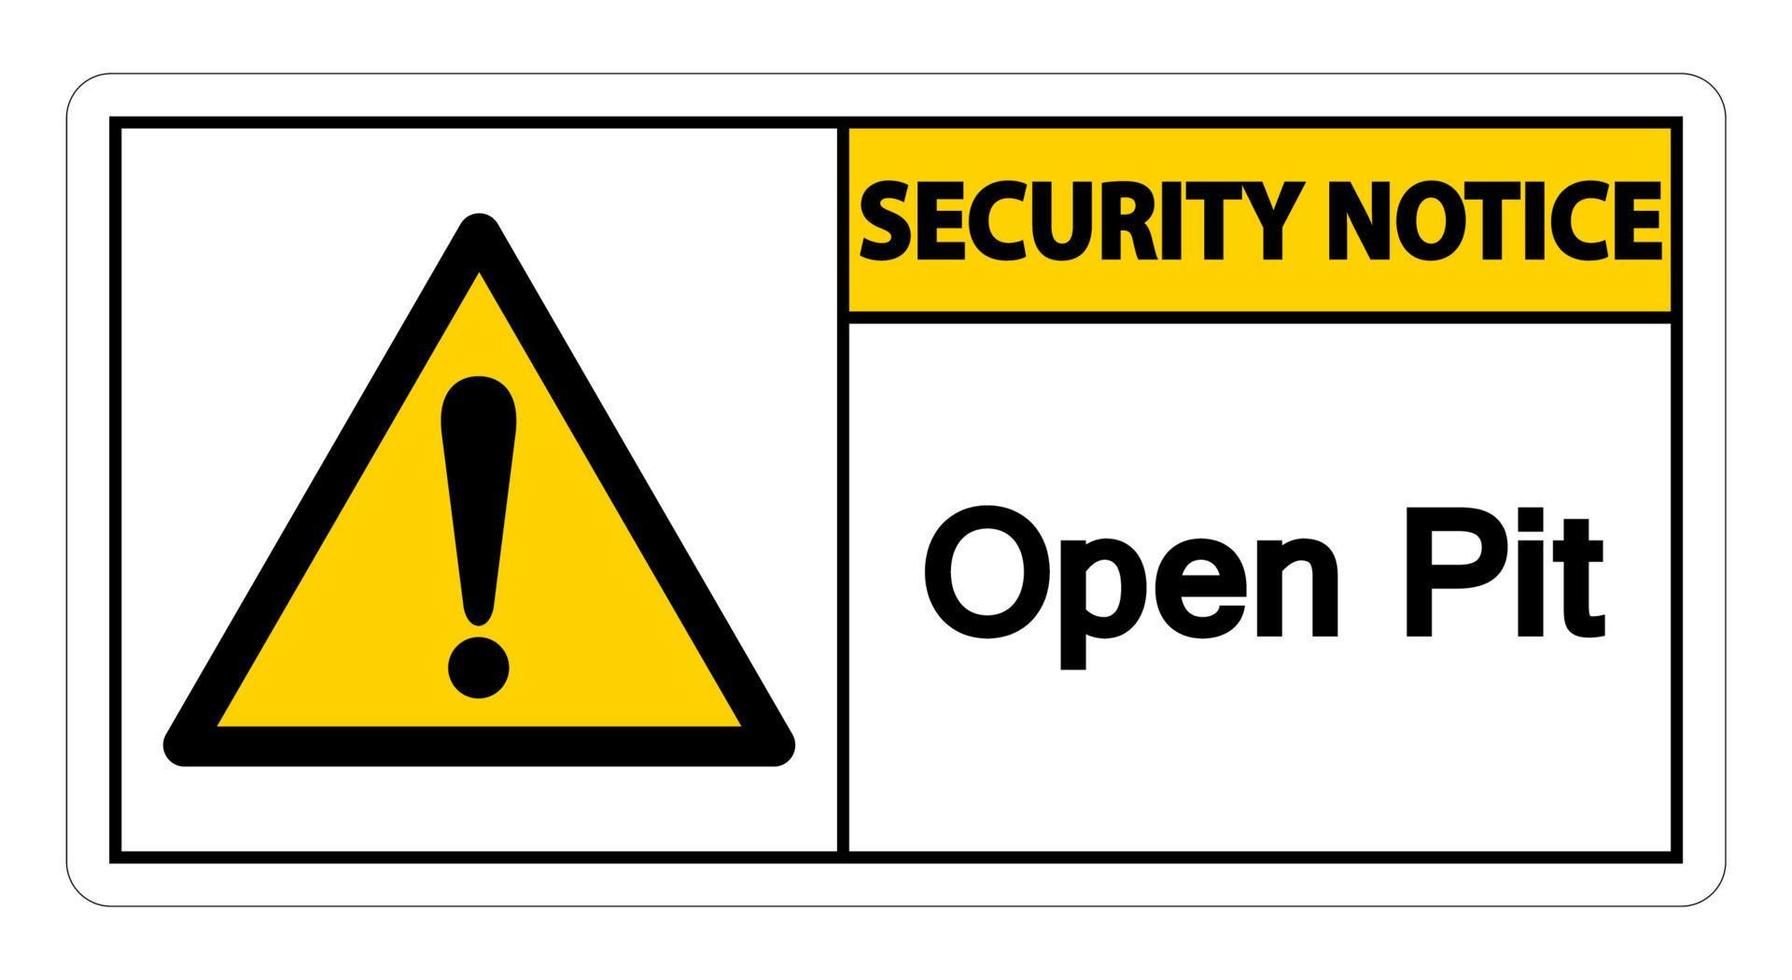 Security Notice Open Pit Symbol Sign On White Background vector